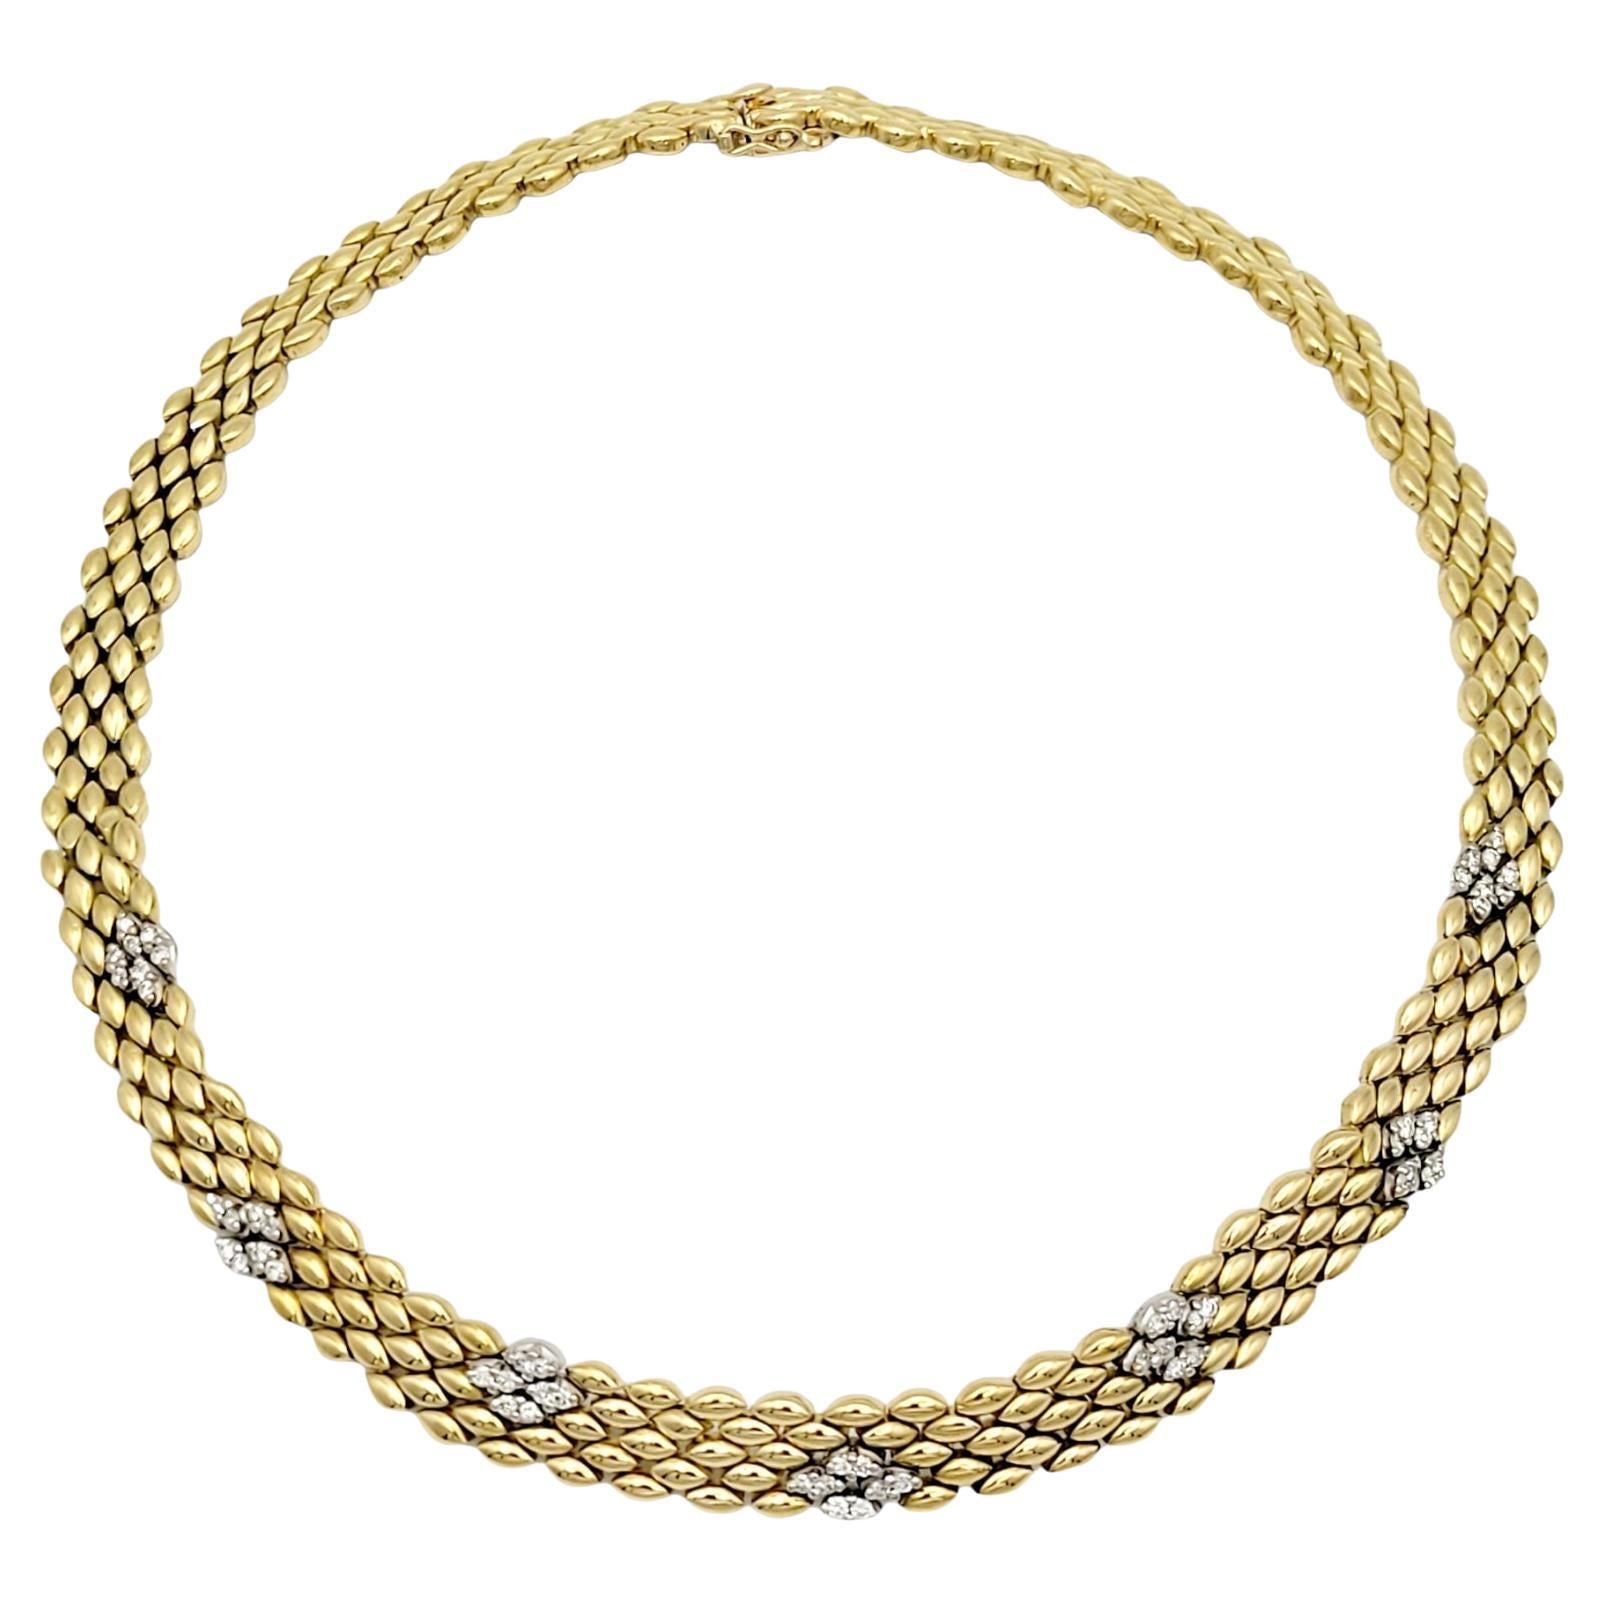 Diamond Panther Link Necklace in 18 Karat Yellow & White Gold Collar Style For Sale